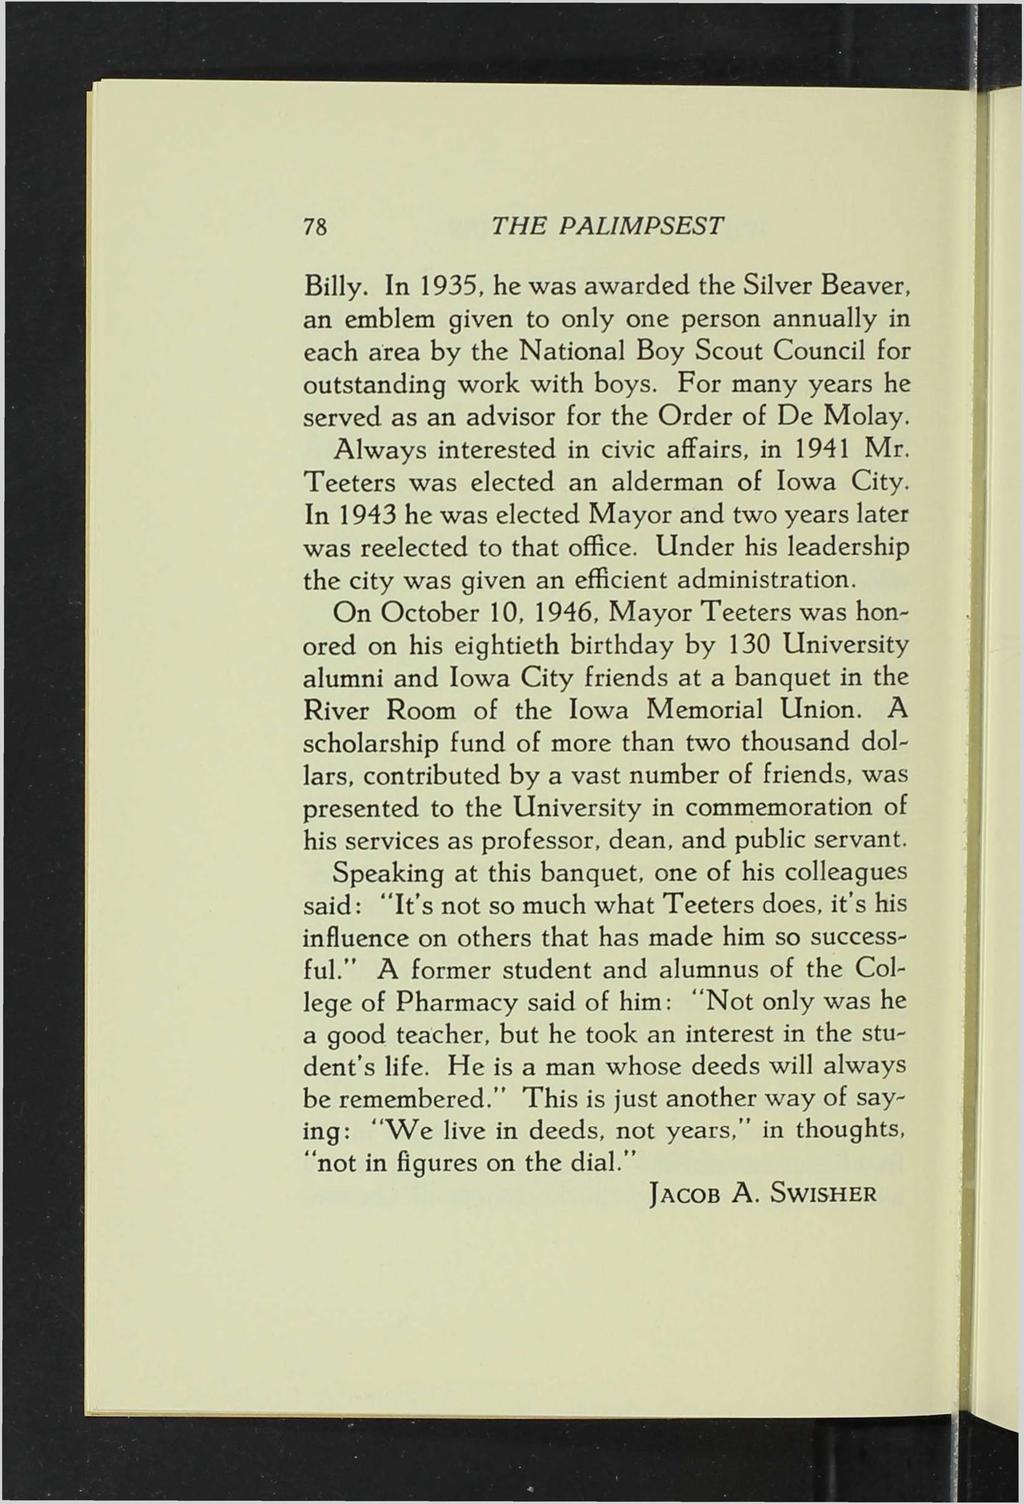 78 THE PALIMPSEST Billy. In 1935, he was awarded the Silver Beaver, an emblem given to only one person annually in each area by the National Boy Scout Council for outstanding work with boys.